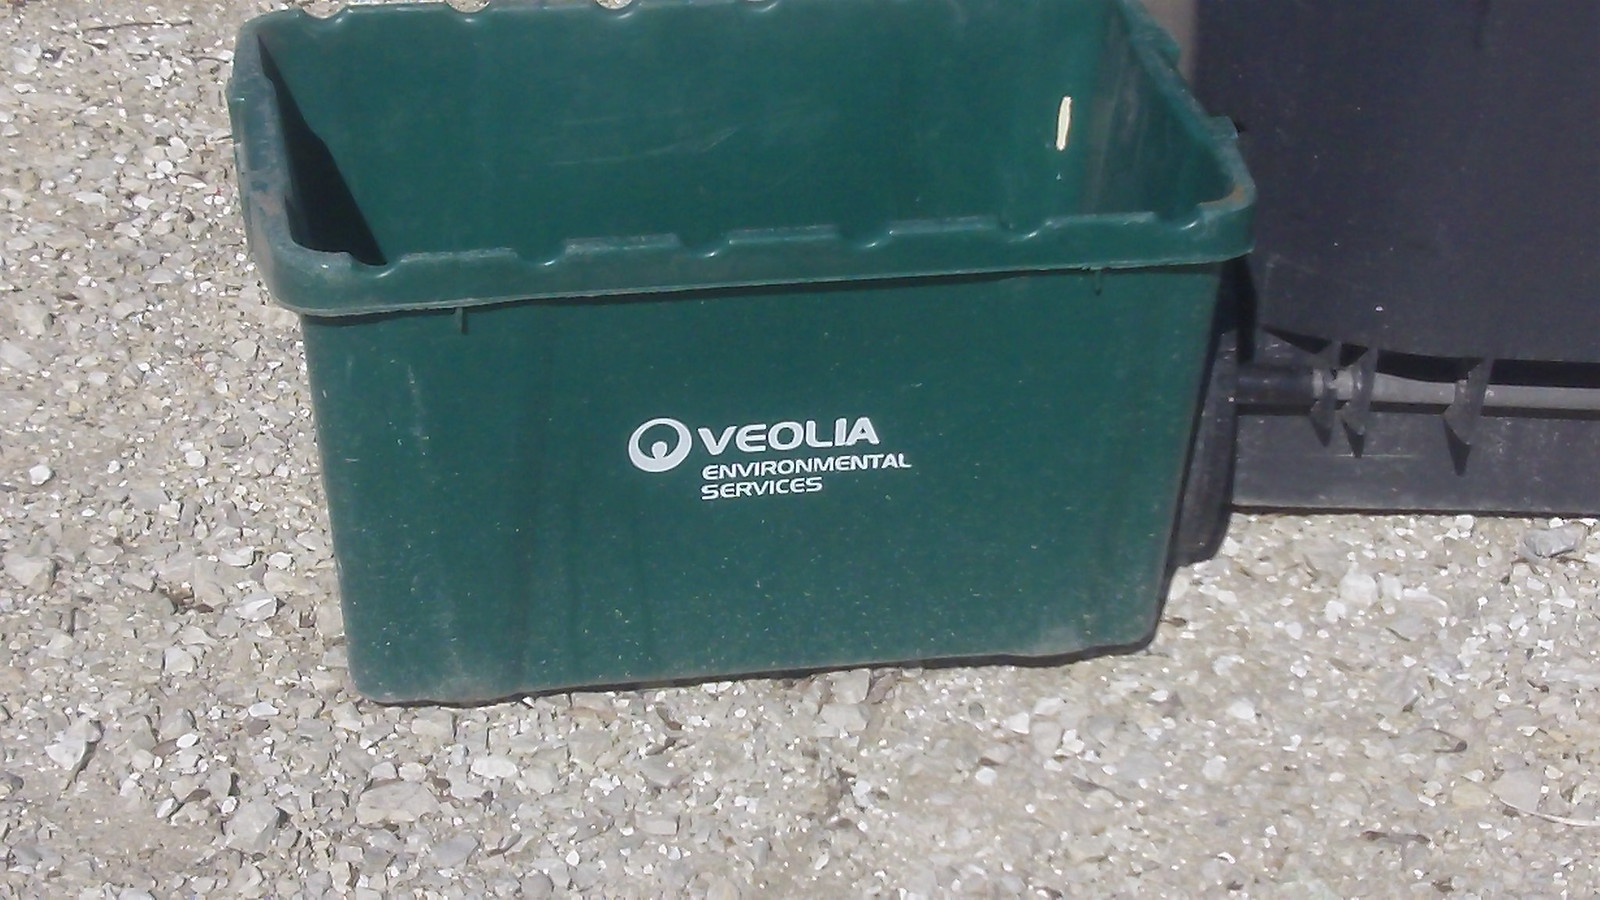 Veolia 18 Gallon Recycle Tub Lets Hope This Gets Re Brande